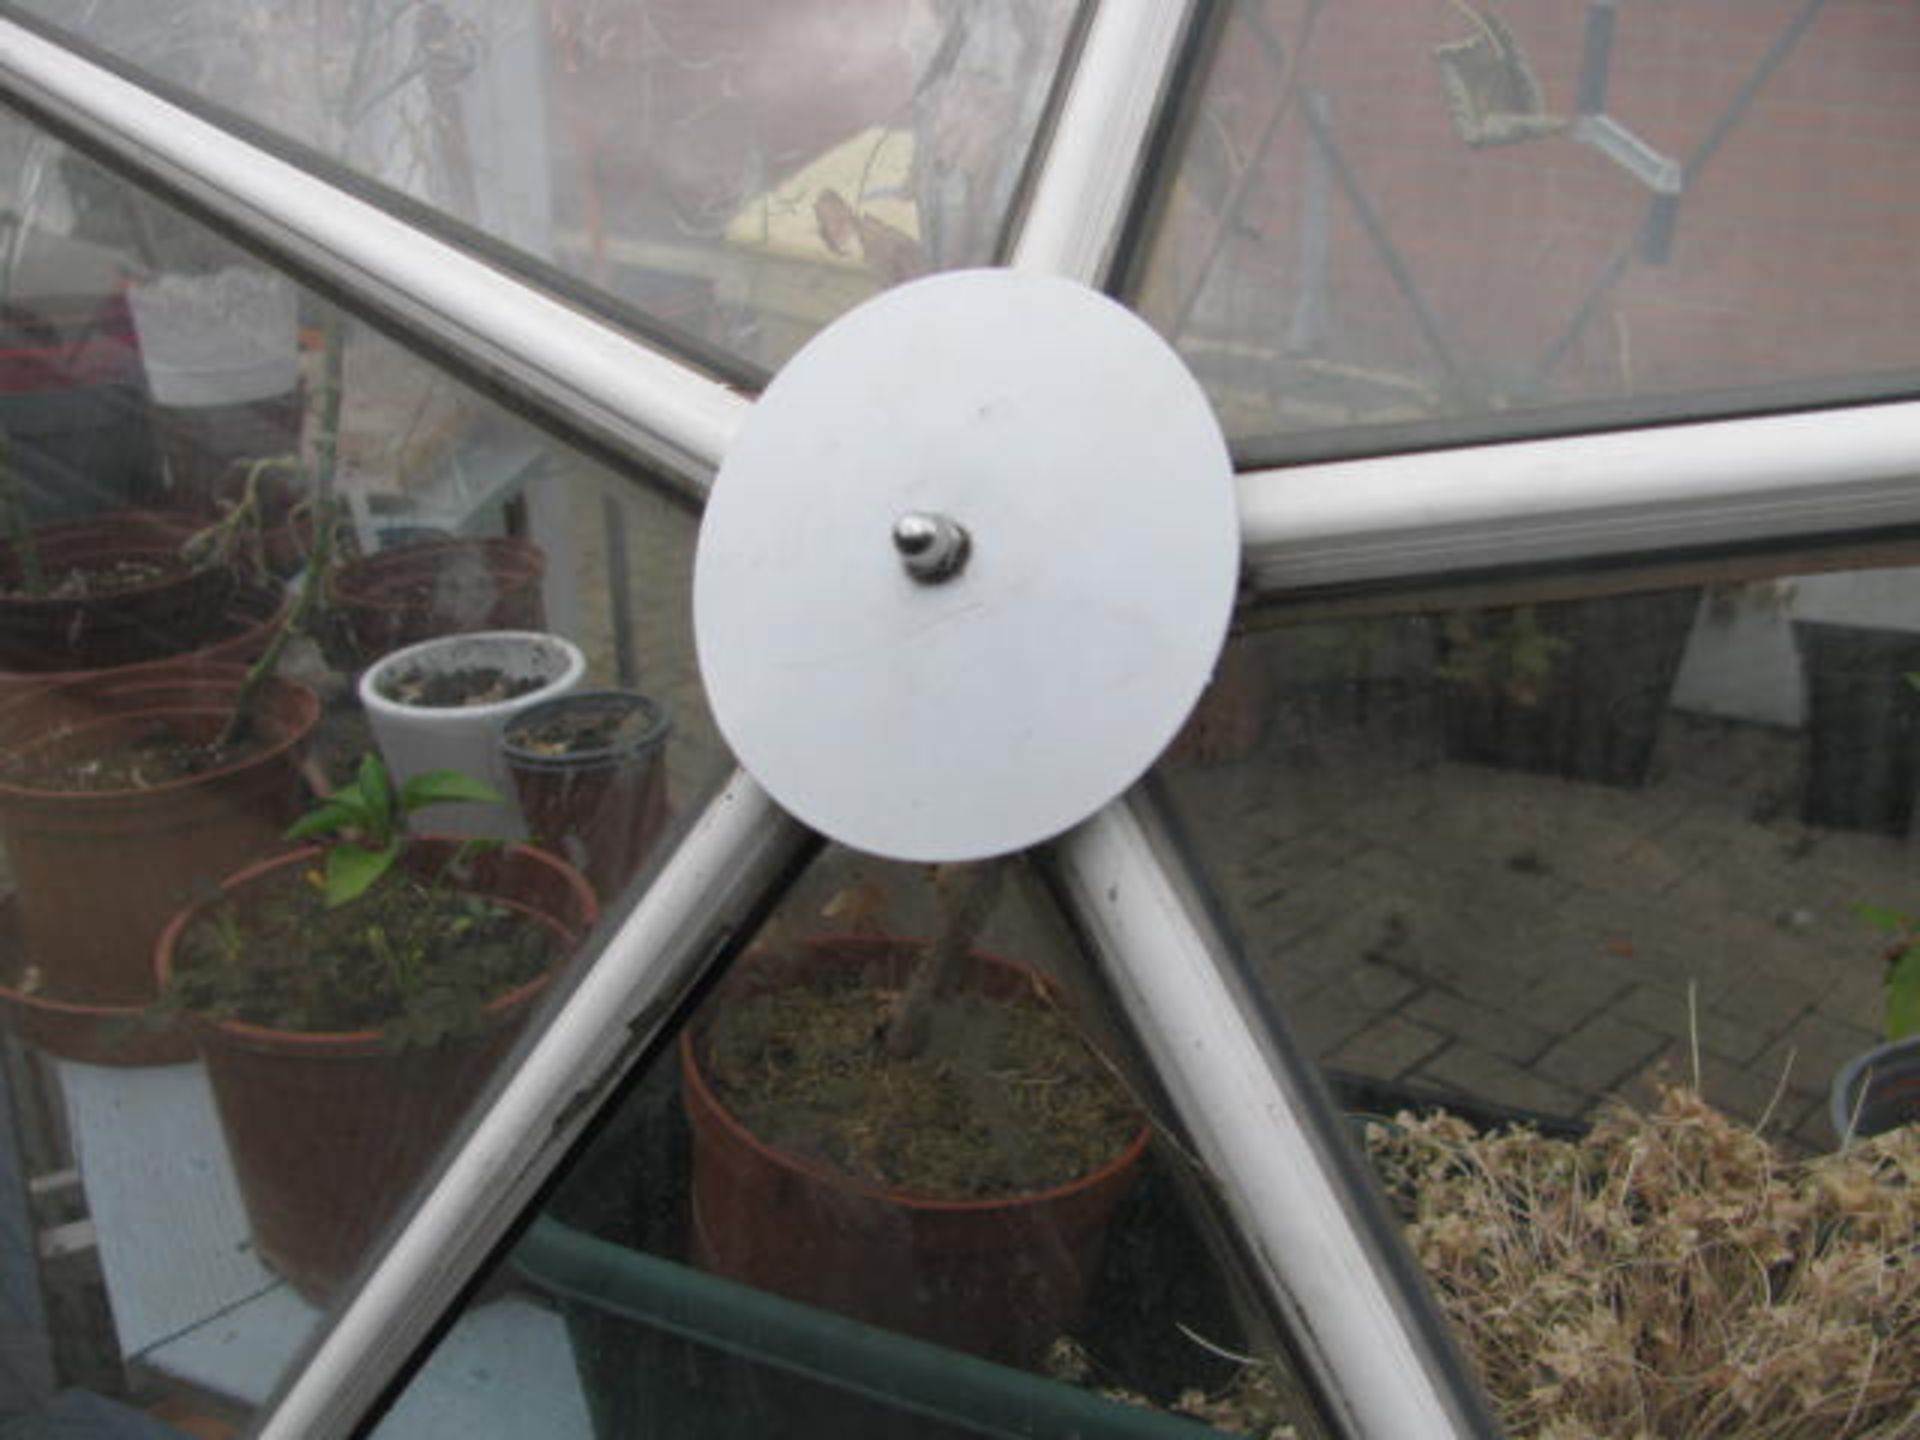 Geodesic dome green house - Image 7 of 7